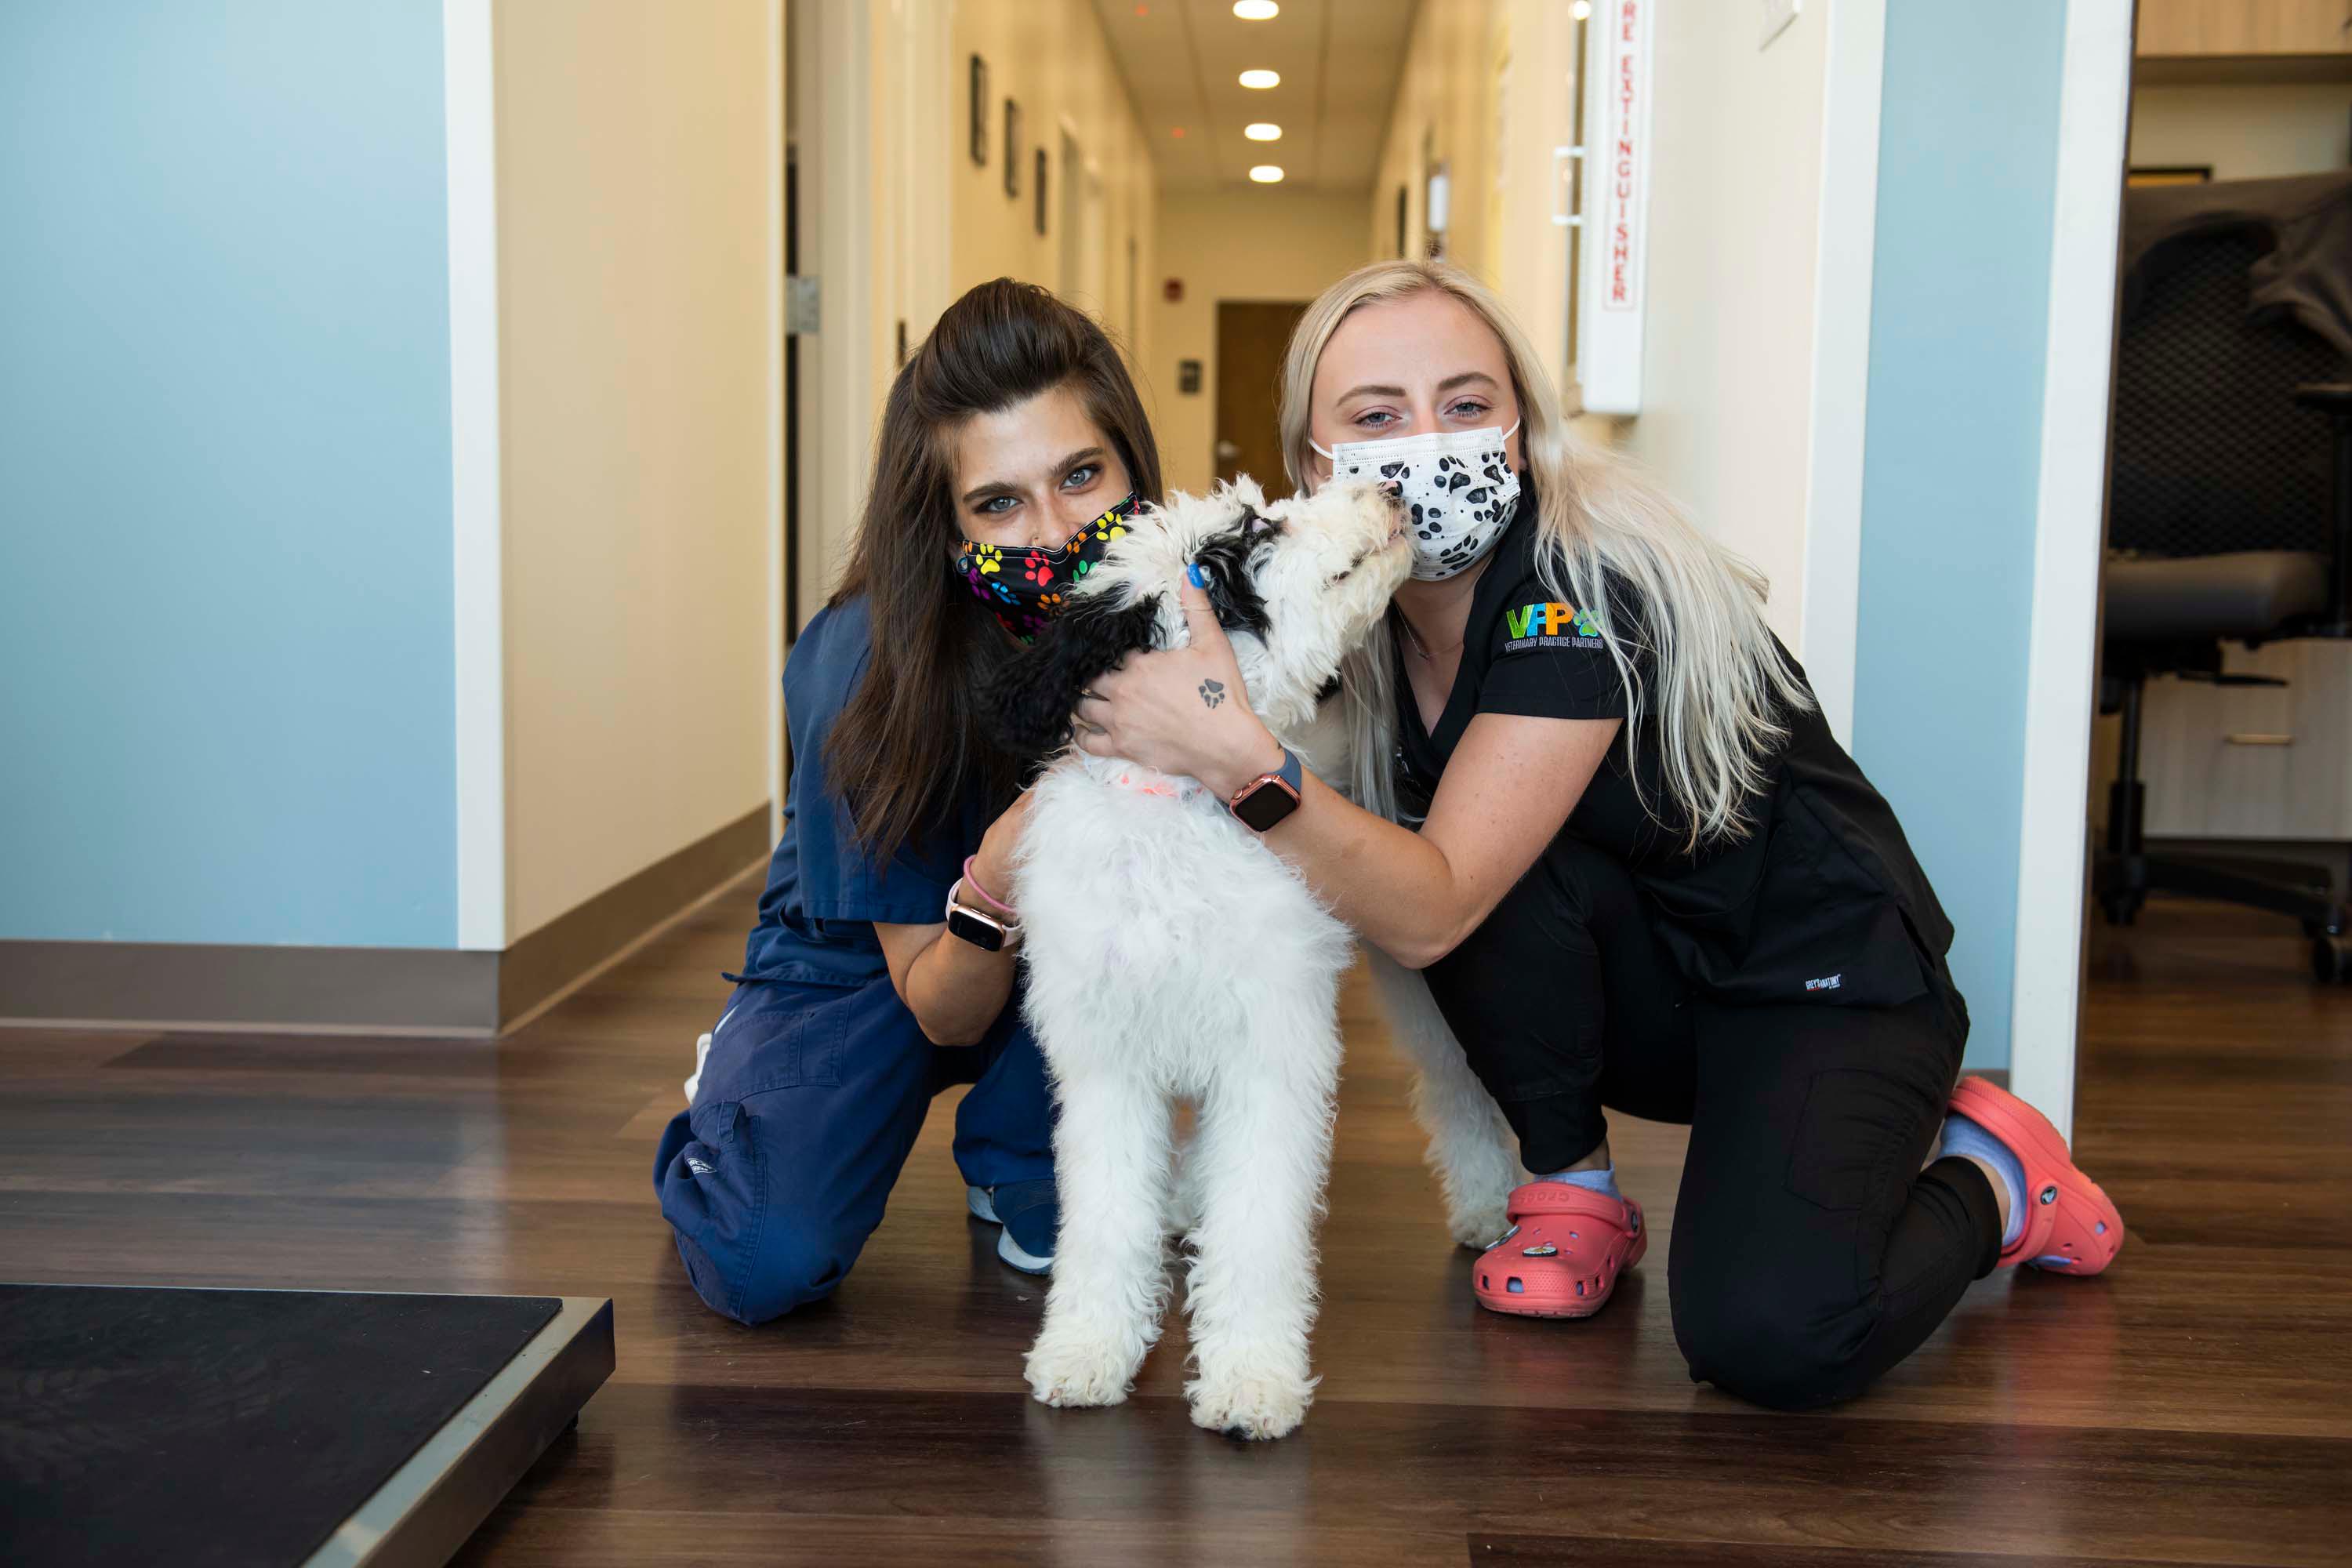 At Harvester Veterinary Hospital, you’ll find the best veterinary care in the Chicago area and the most compassionate team of veterinary experts around.